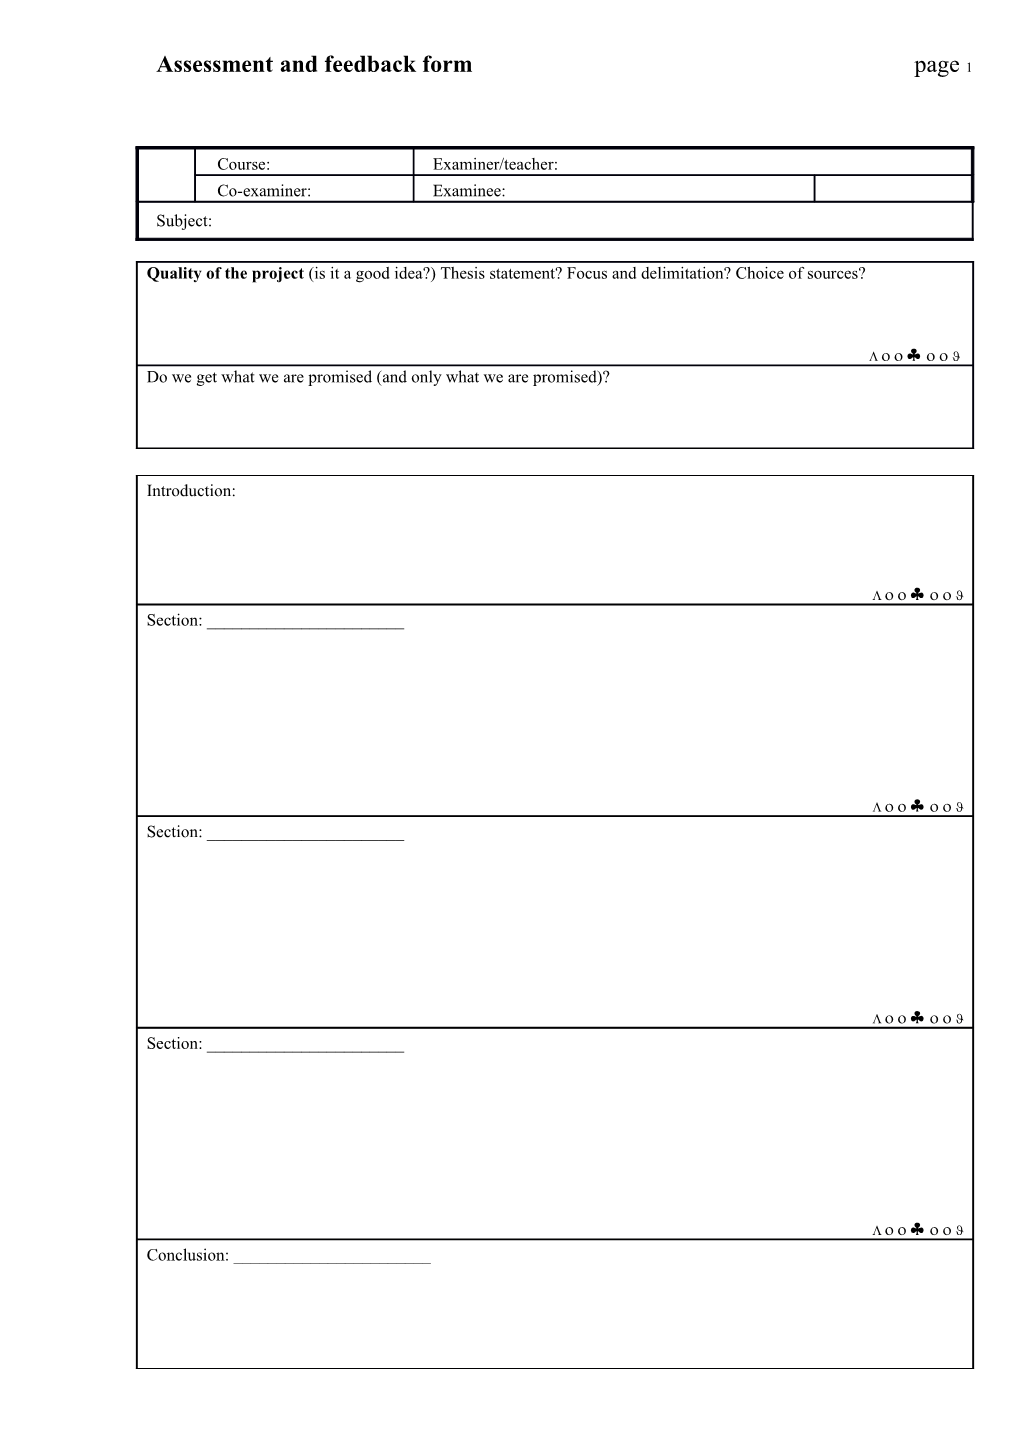 Assessment and Feedback Form Page 1